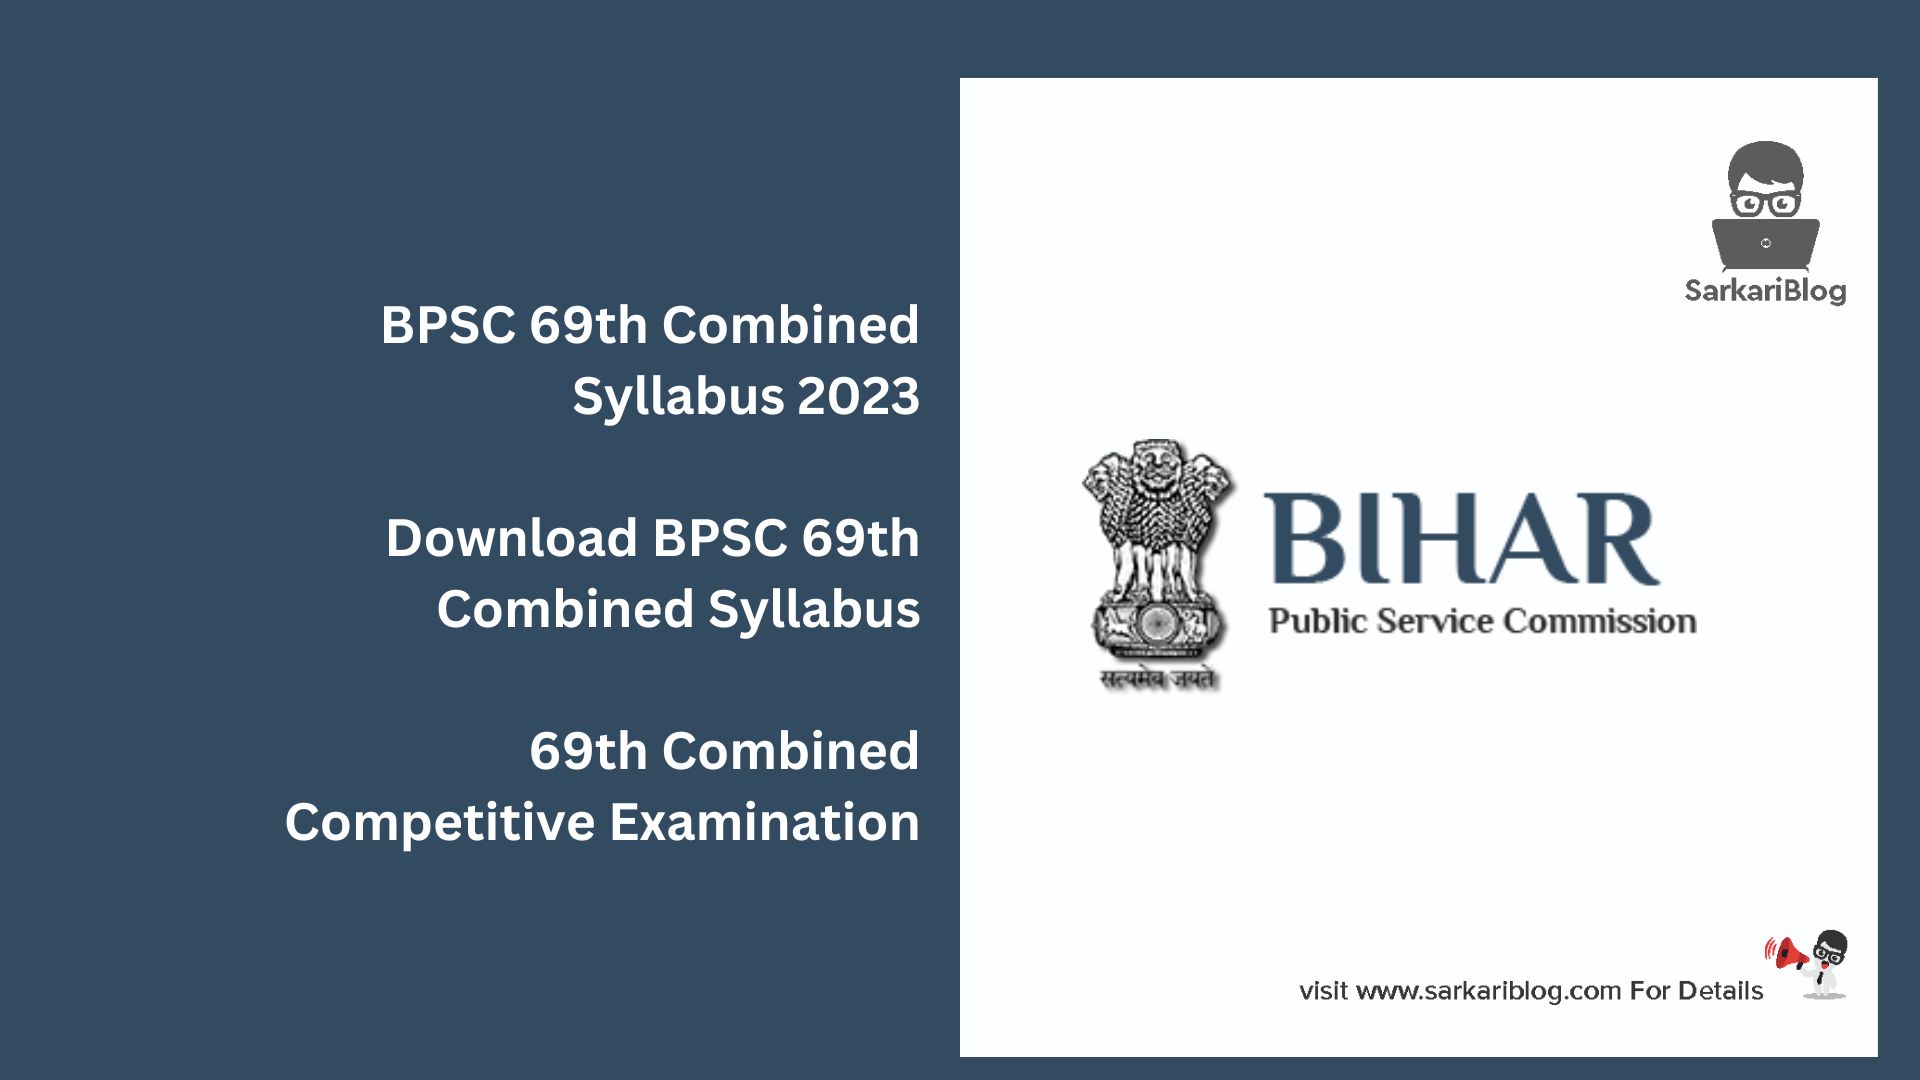 BPSC 69th Combined Syllabus 2023